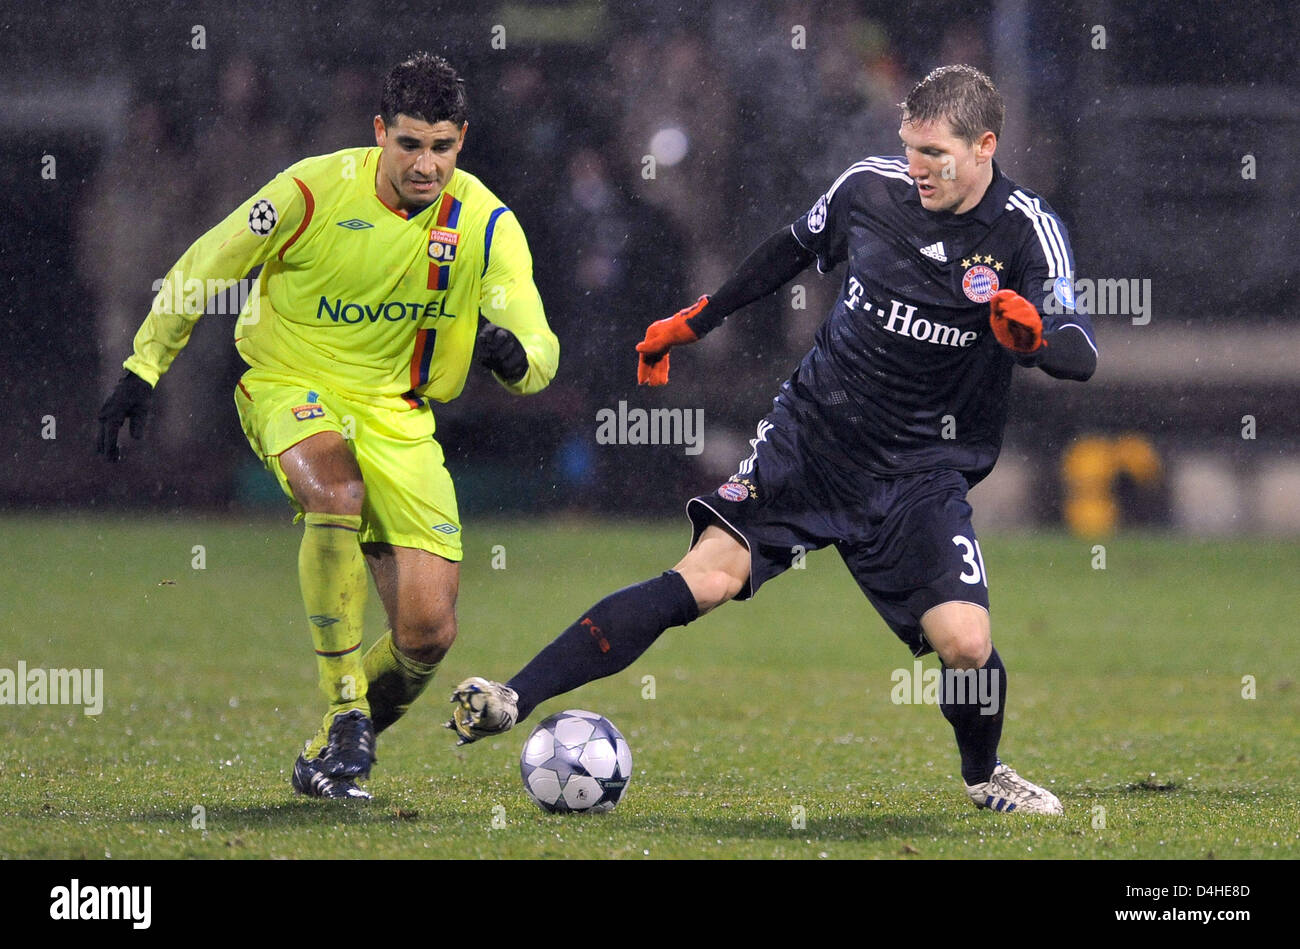 Ederson (L) of Olympique Lyon vies for the ball with Bastian Schweinsteiger of FC Bayern Munich during the Champions League Group F match at Stade de Gerland in Lyon, France, 10 December 2008. Bayern Munich defeated Lyon 3-2 securing the first place in UEFA Champions League Group F. Photo: Andreas Gebert Stock Photo